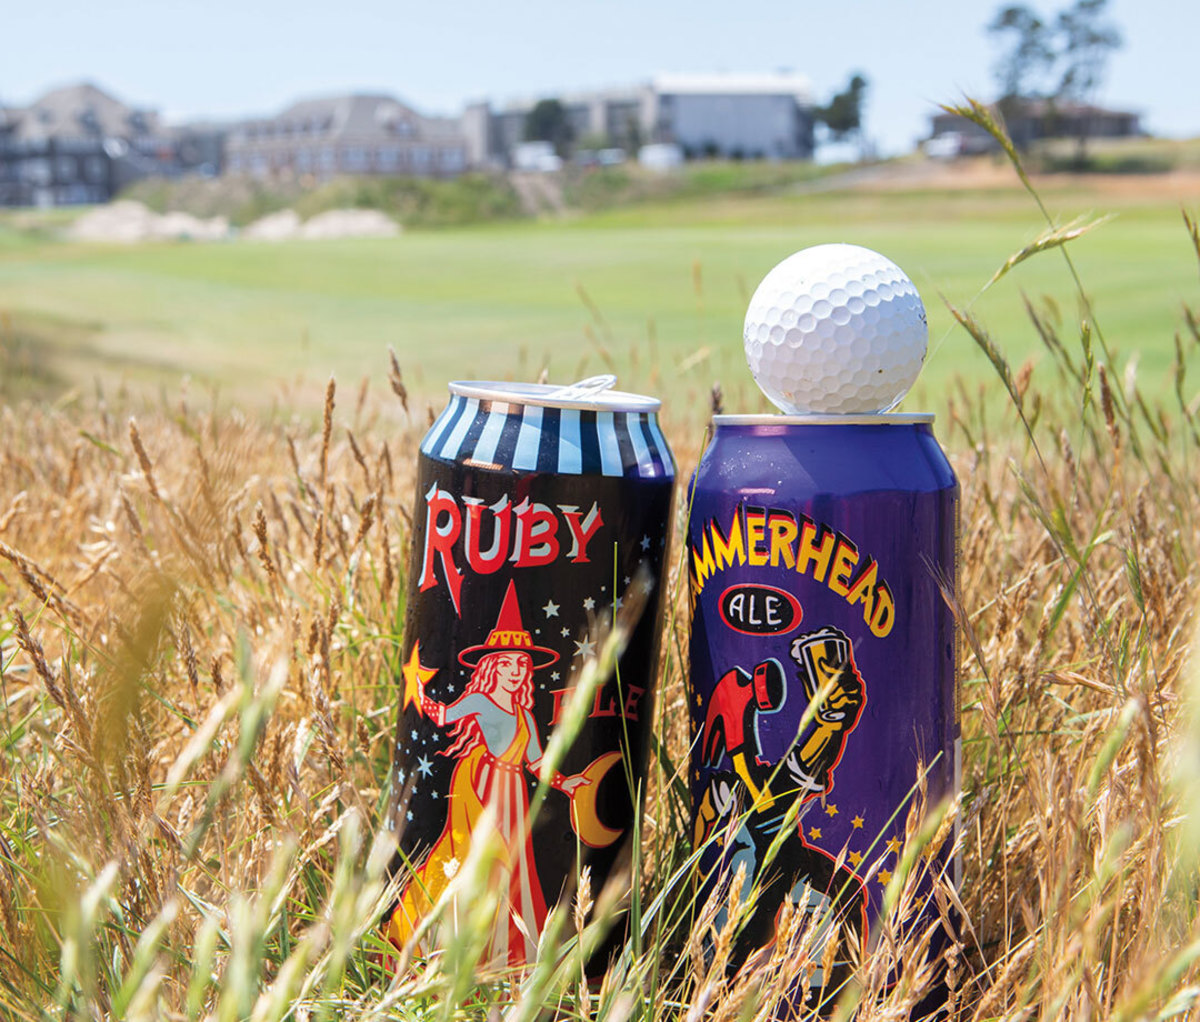 Two cans of beer resting in grass at golf course with golf ball on top of right can